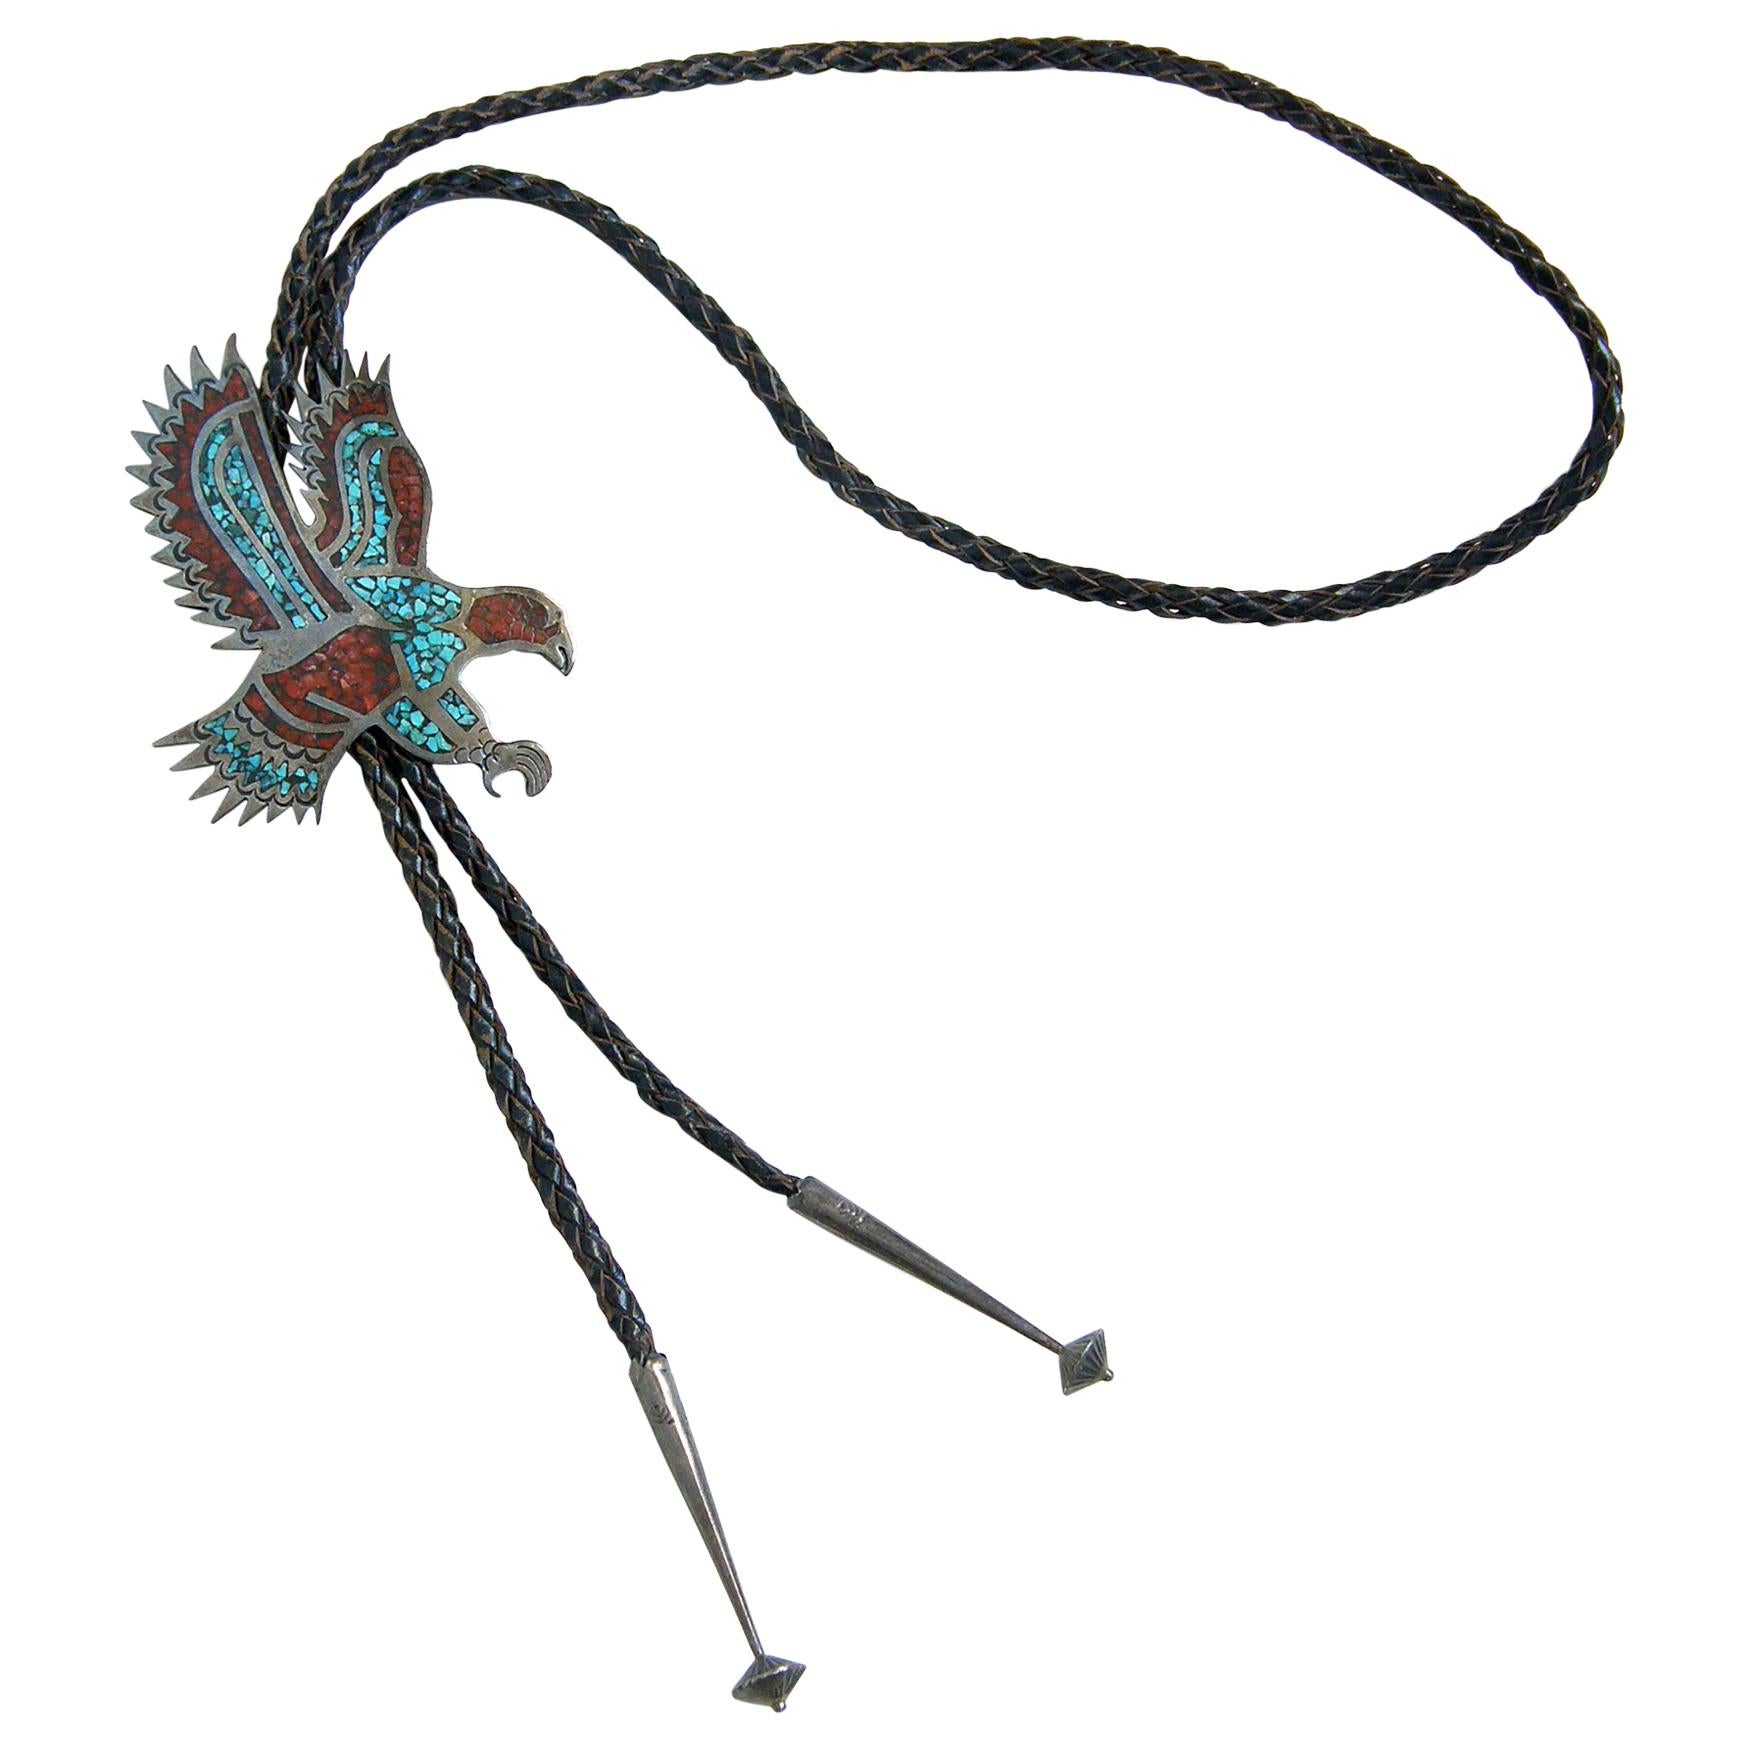 Circa 1970s Sterling Silver Eagle Bolo Tie with Chip Inlay Turquoise and Coral